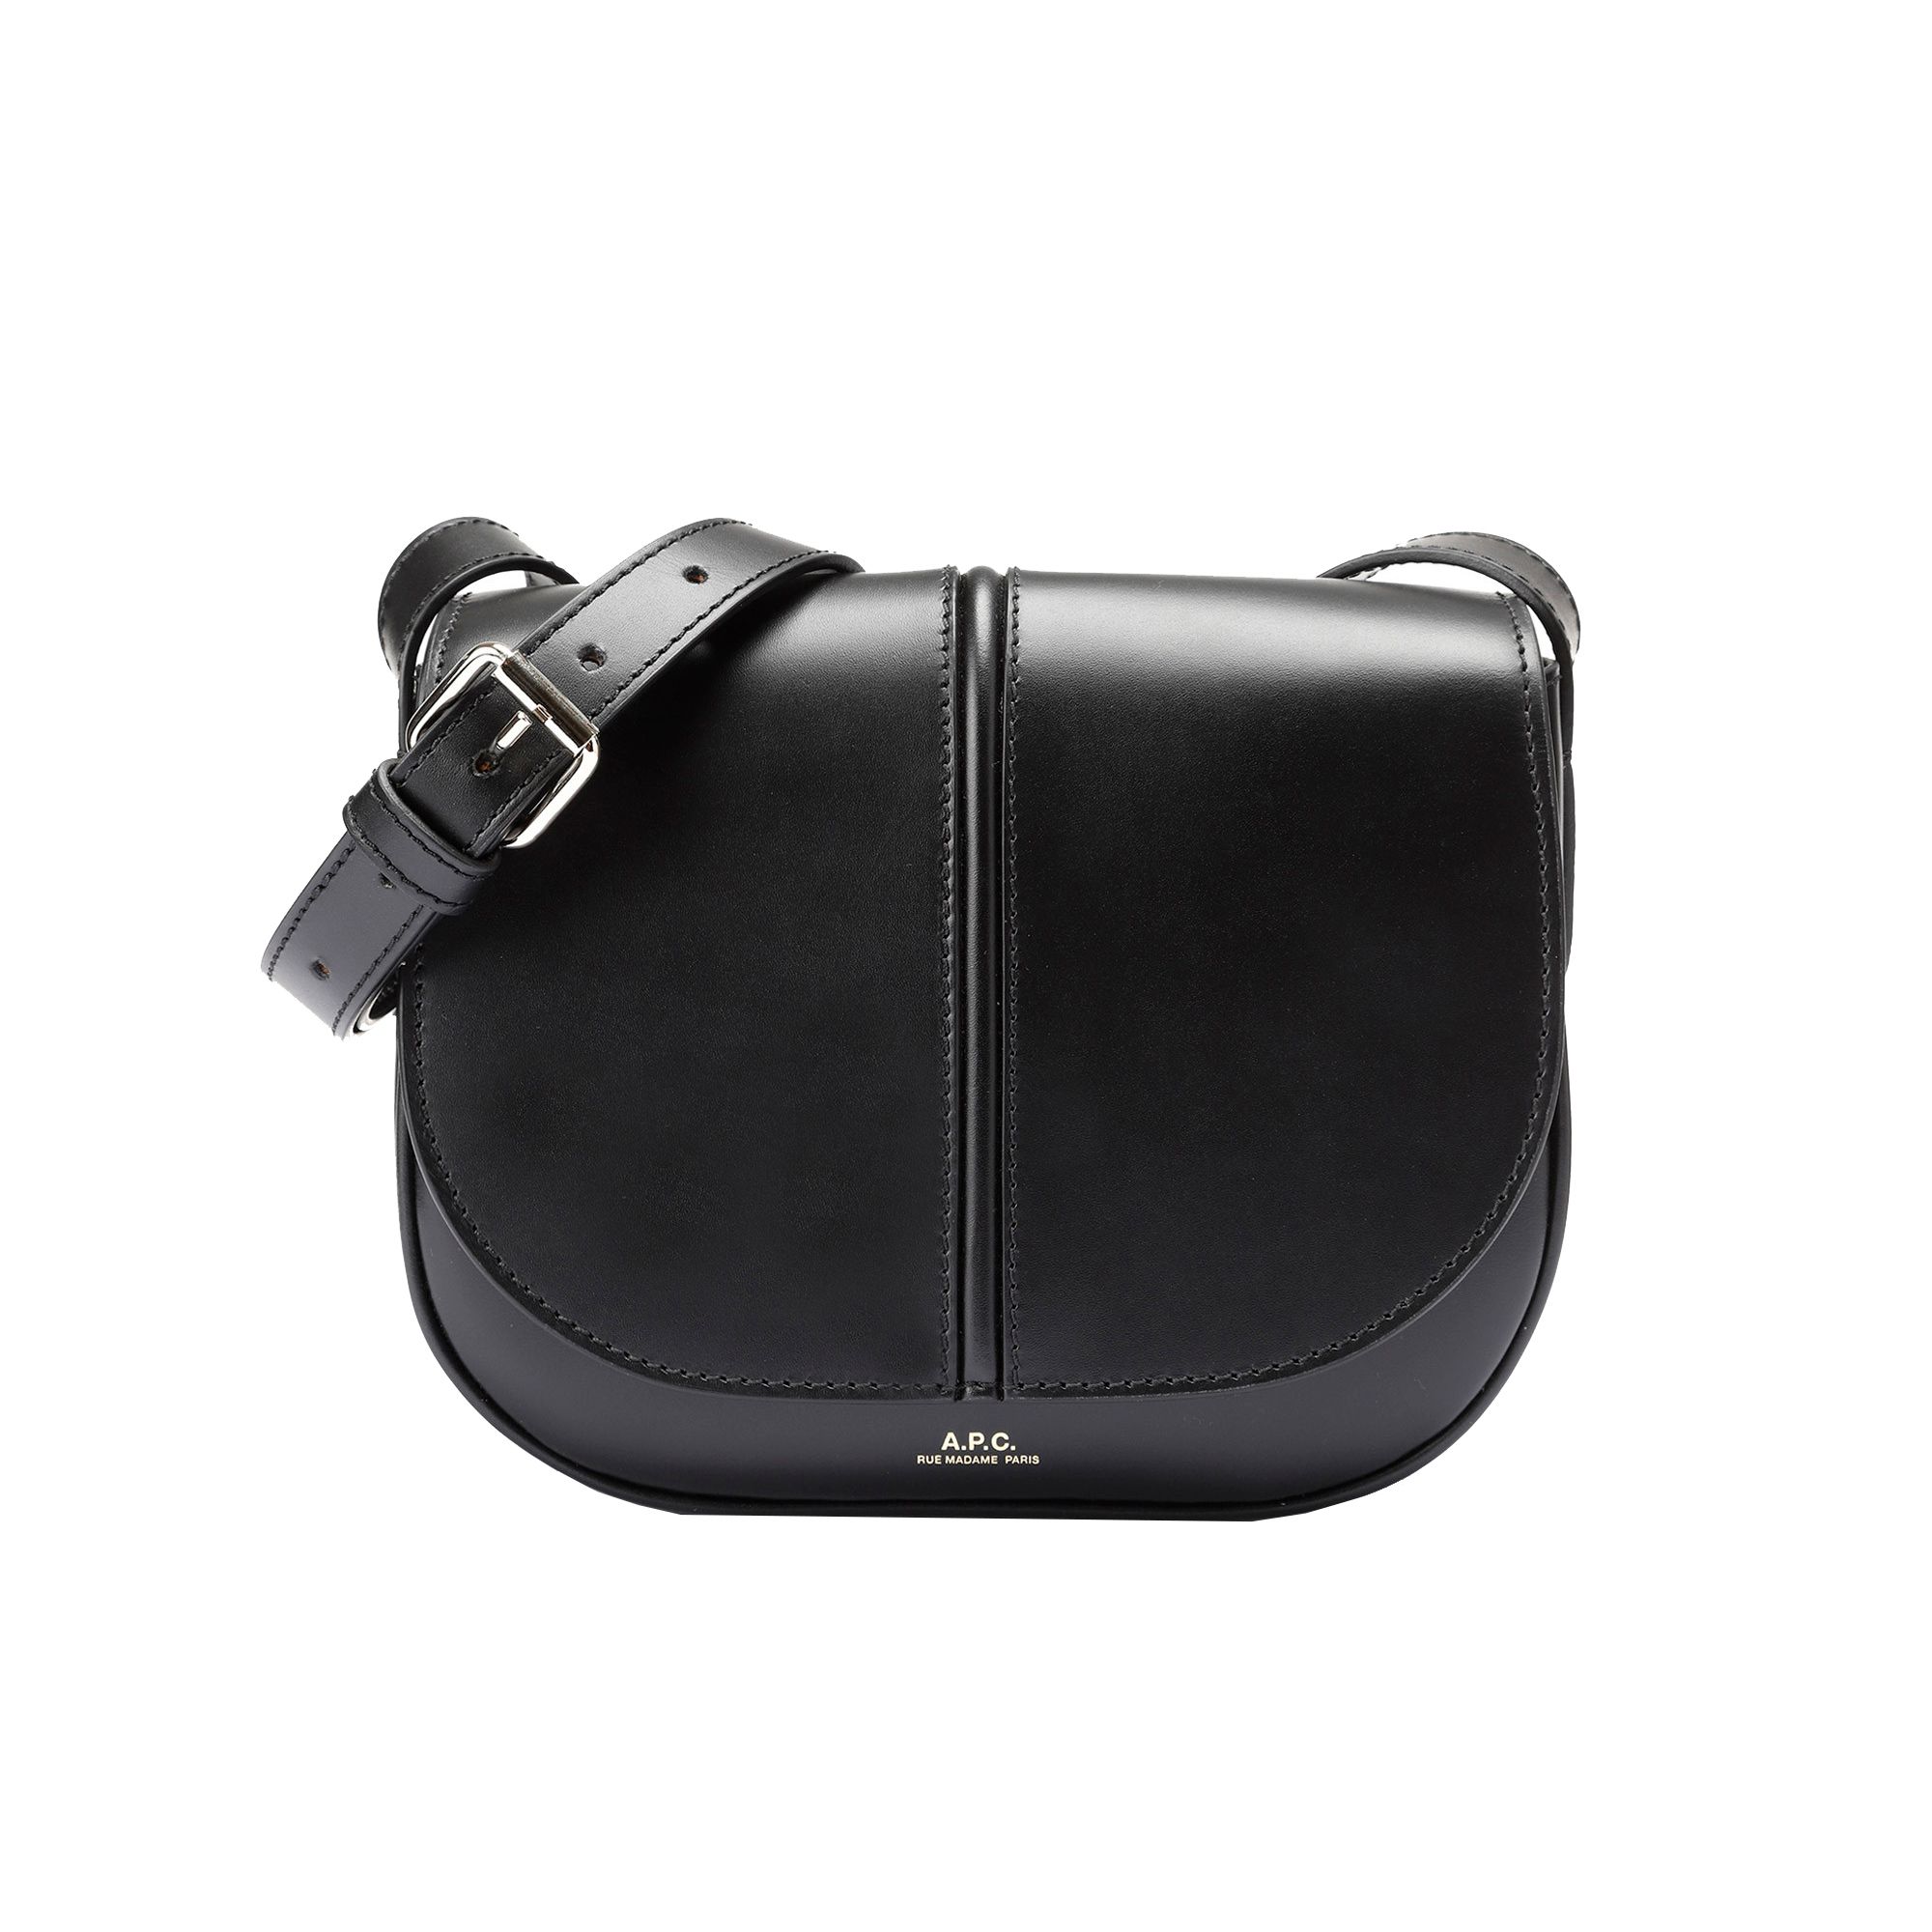 A.P.C. - Betty smooth leather bag - Black | Smallable